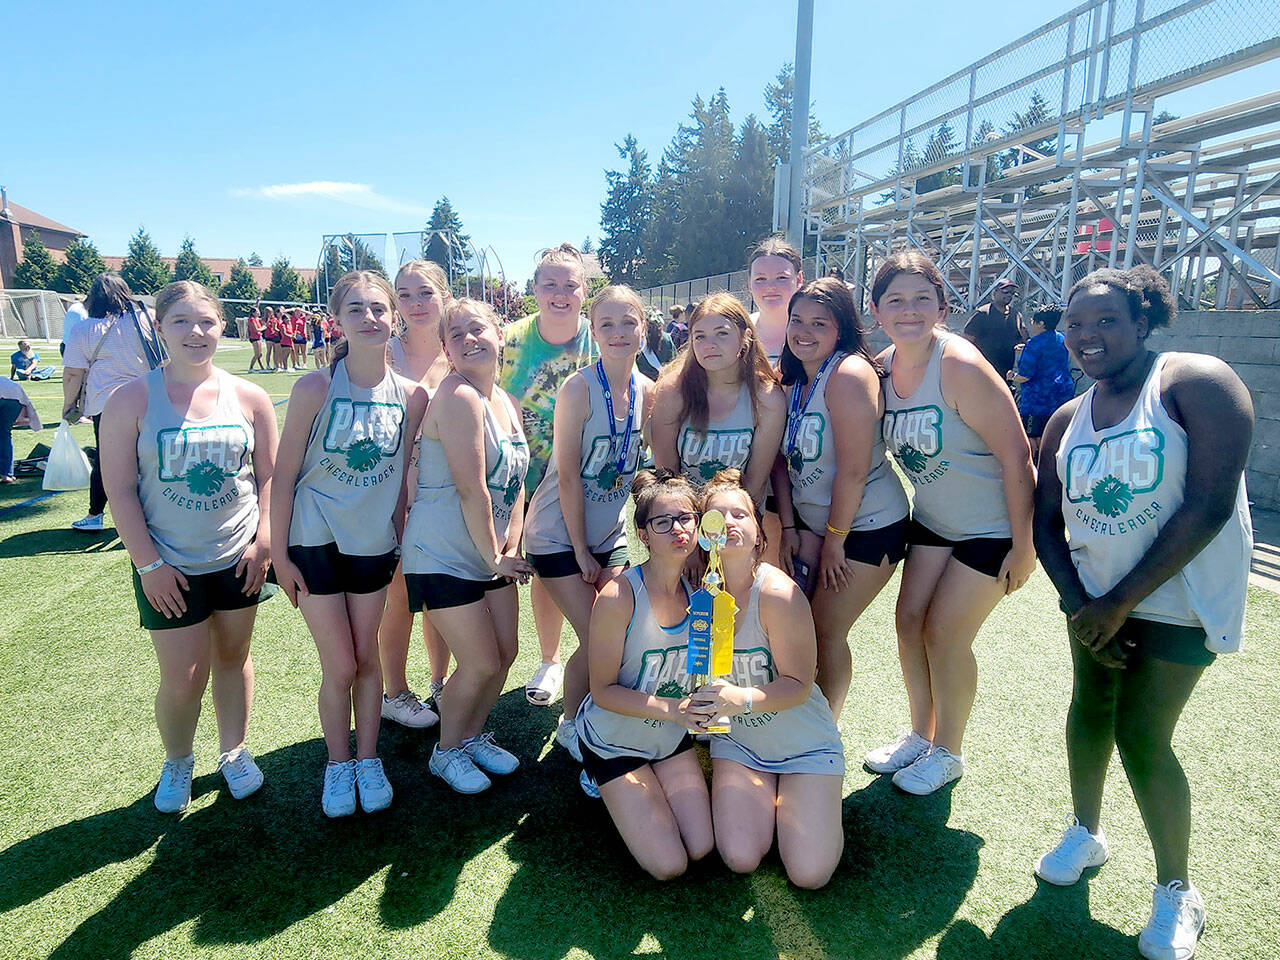 The Port Angeles High School Cheer program earned first place in the Cheer Small Varsity Division and also was awarded a spirit stick for their hard work at Universal Cheerleaders Association camp at University of Puget Sound in July. Team members are: Abby Cuellar, Addisen McNeece, Ailey Thibeault, Anna Possinger, Ava Fox, Ella Garcelon, Hannah Martin, Jordyn Erdmann, Julia McDonald, Madison Bishop, Mylee Soiseth, Naomi Wait, Tish Hamilton. The Riders are coached by DaLasa Doane.